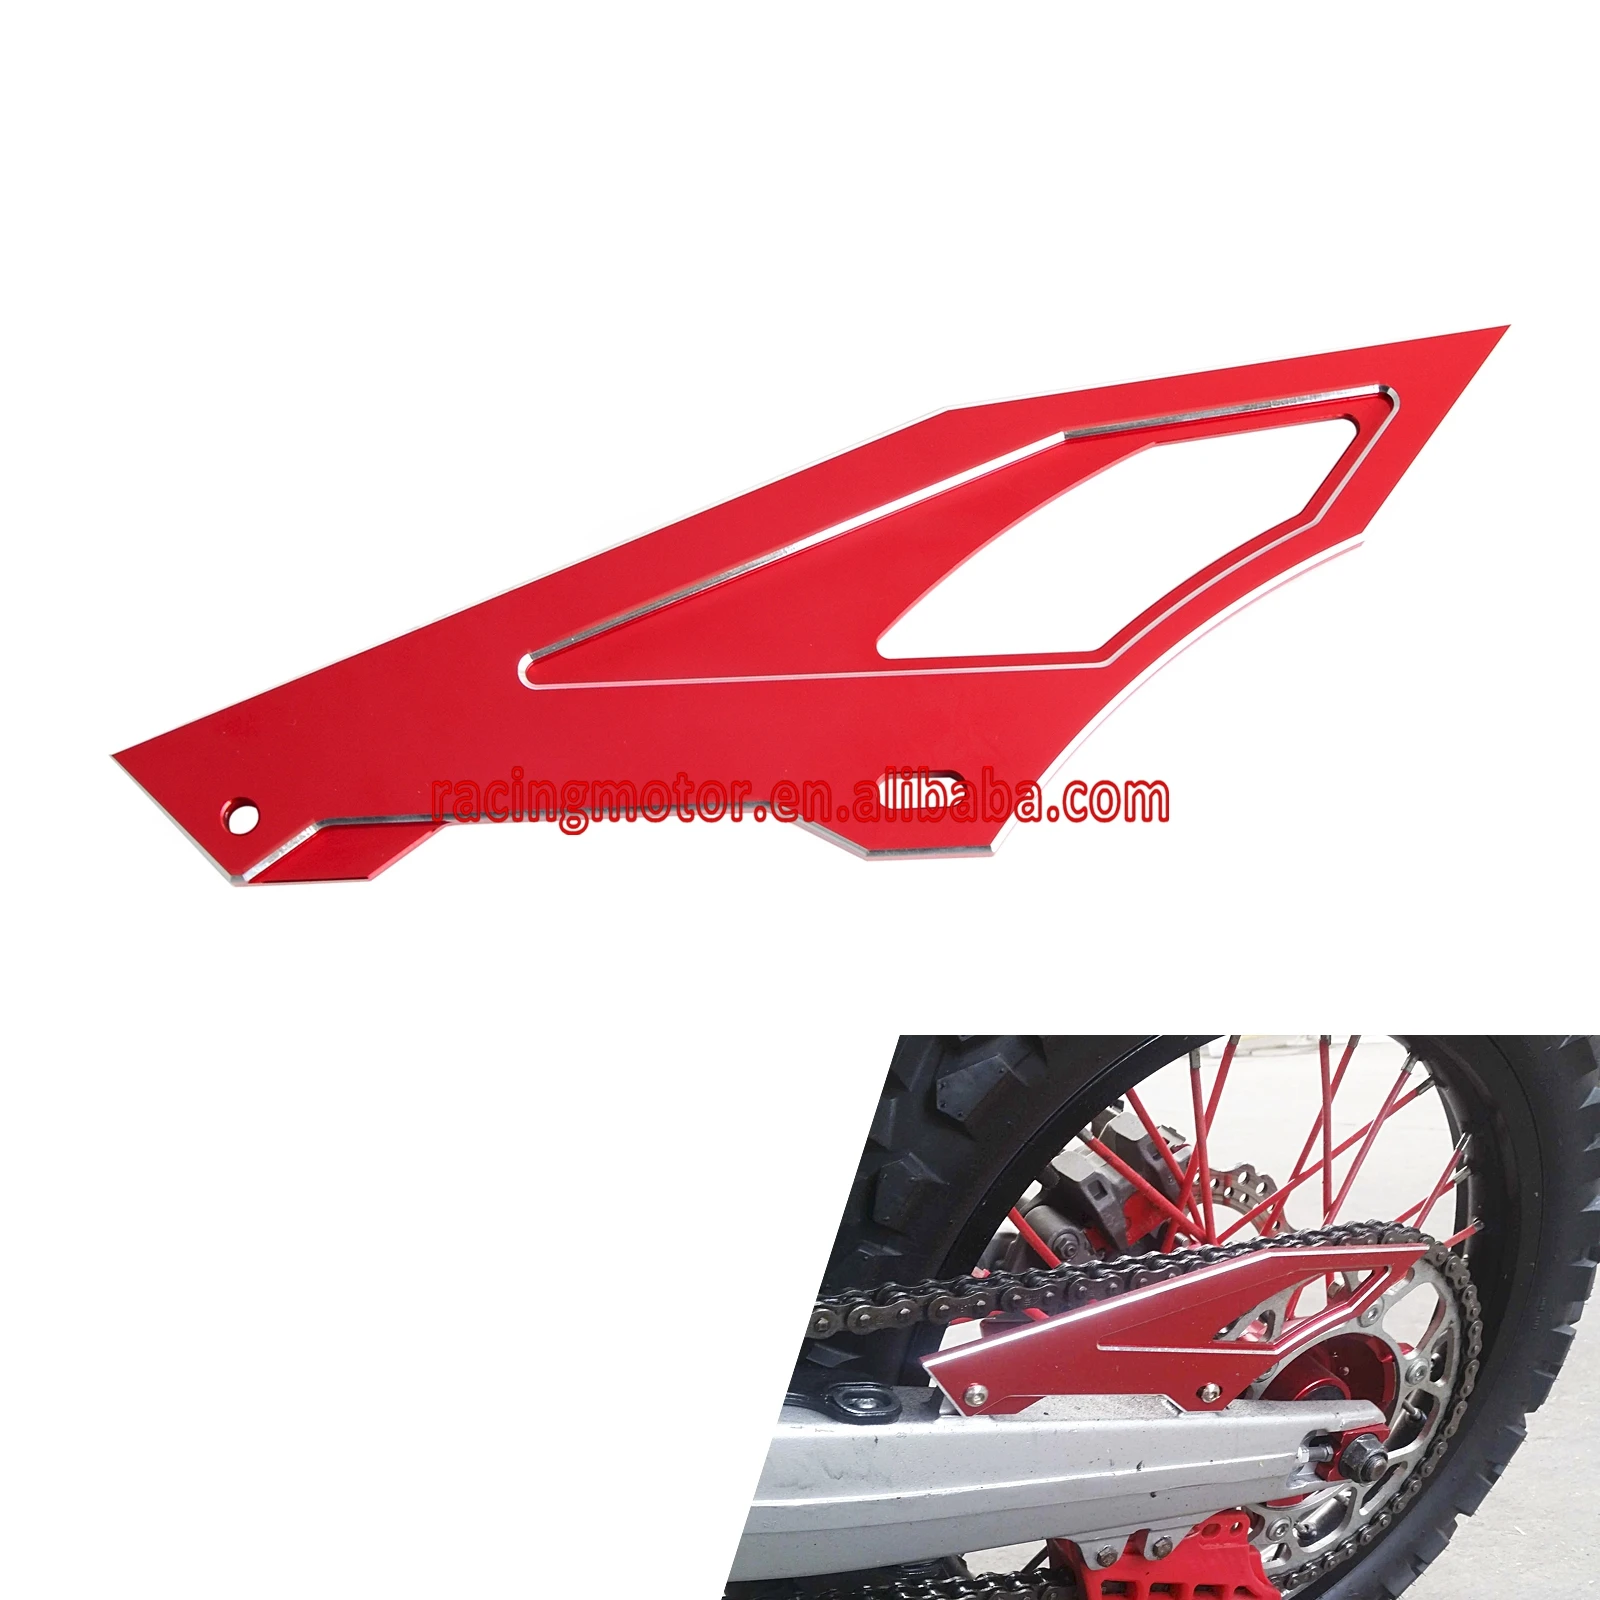 Aluminum Chain Cover Guard For Honda CRF 250L CRF250M 2012-2015 XR250 Baja 1995-Up Also Fit Yamaha Serow225 TW200 TW225